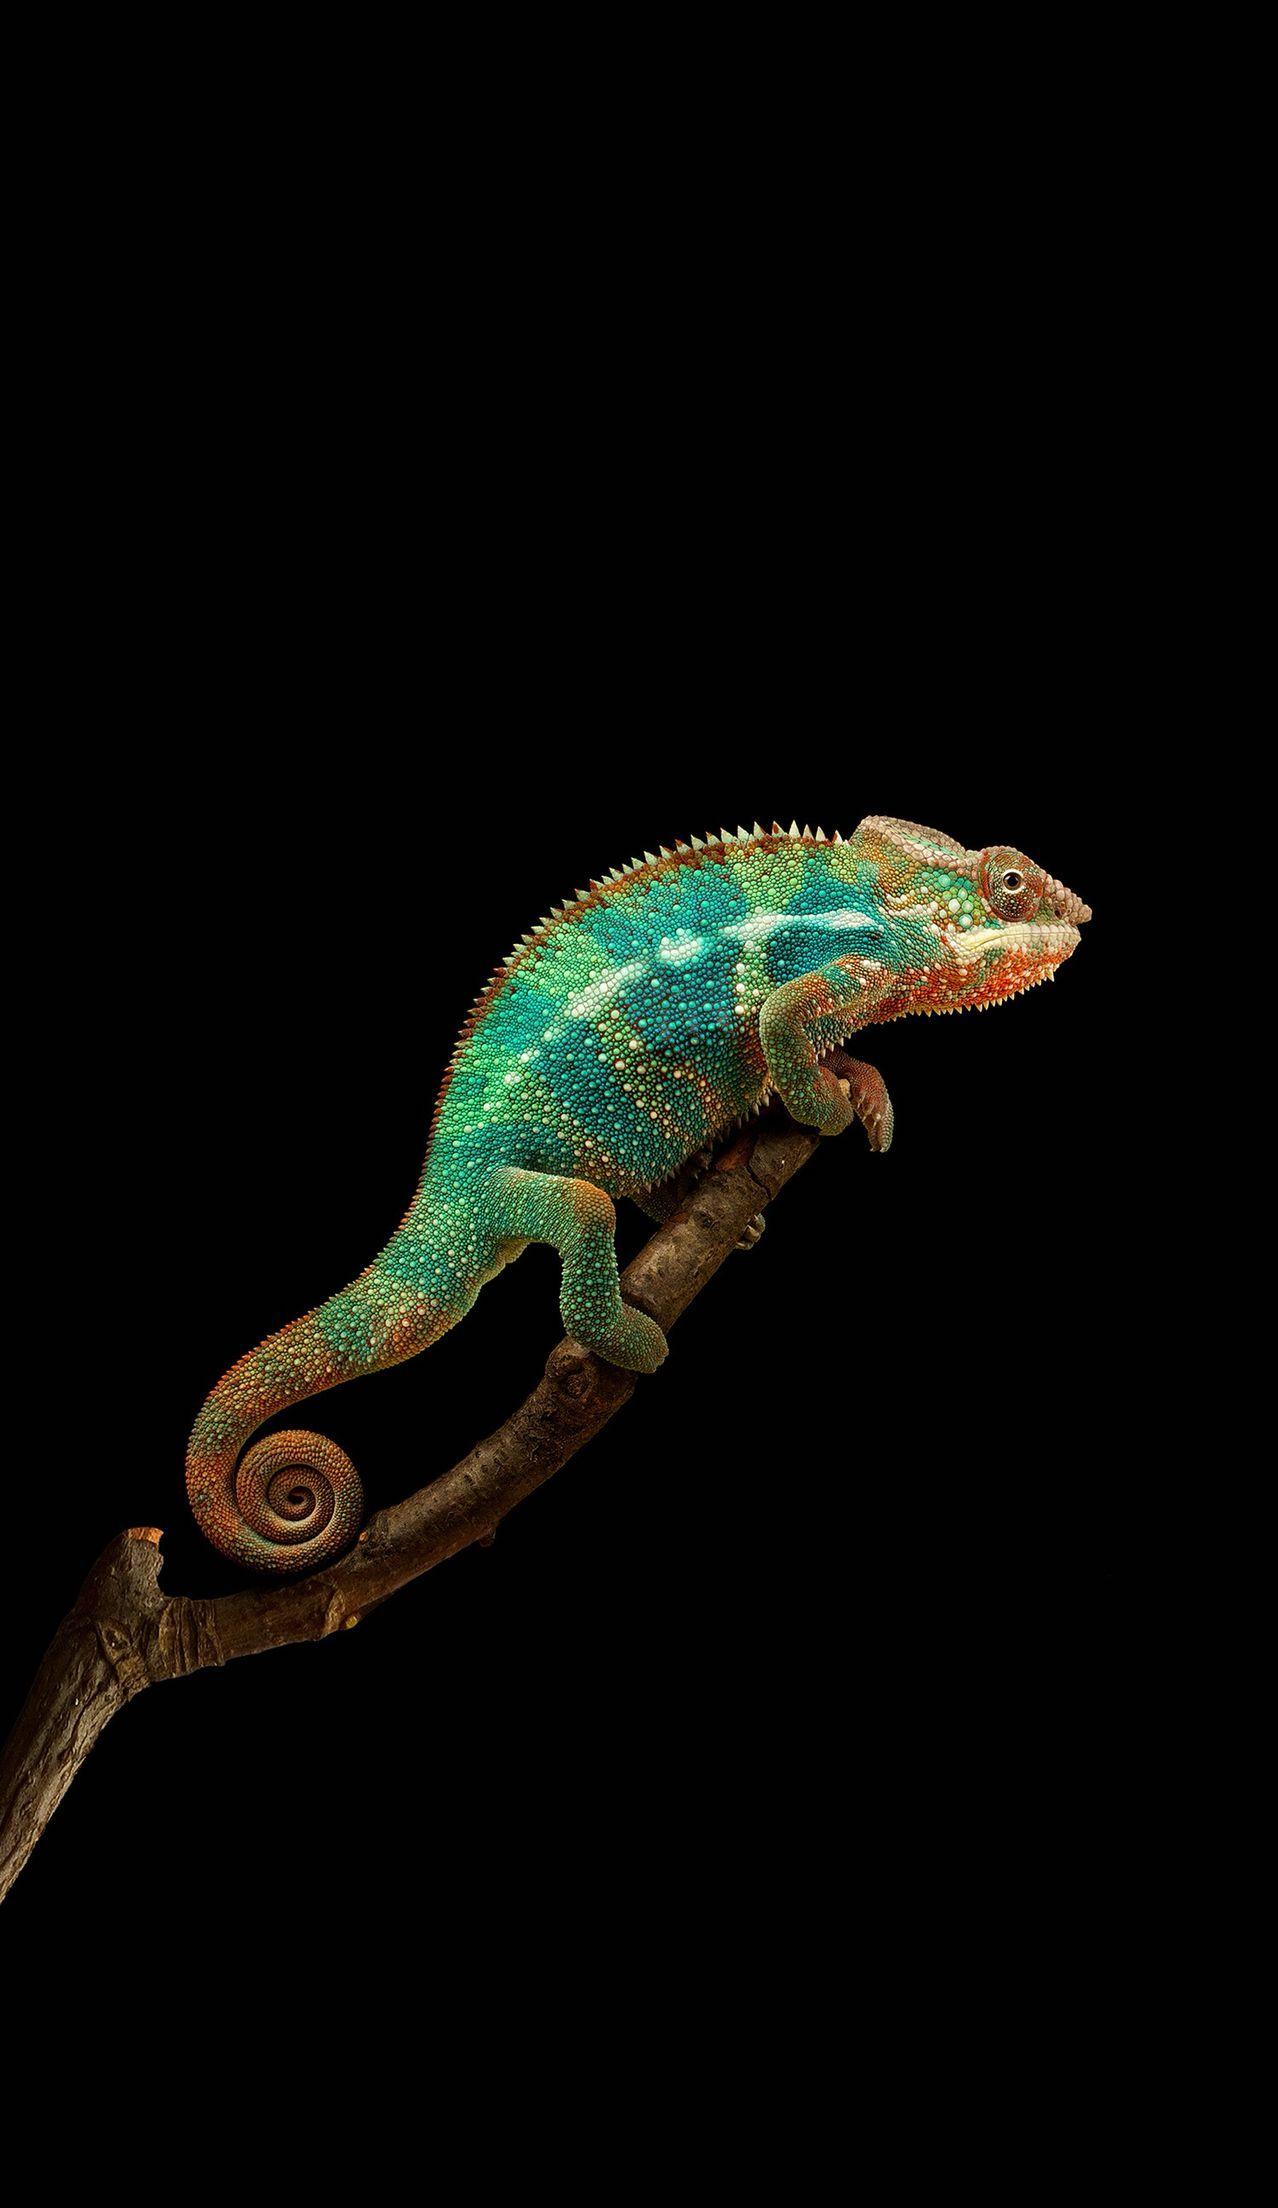 Unique Chameleon Changing Colour Free iPhone Wallpapers Free Download